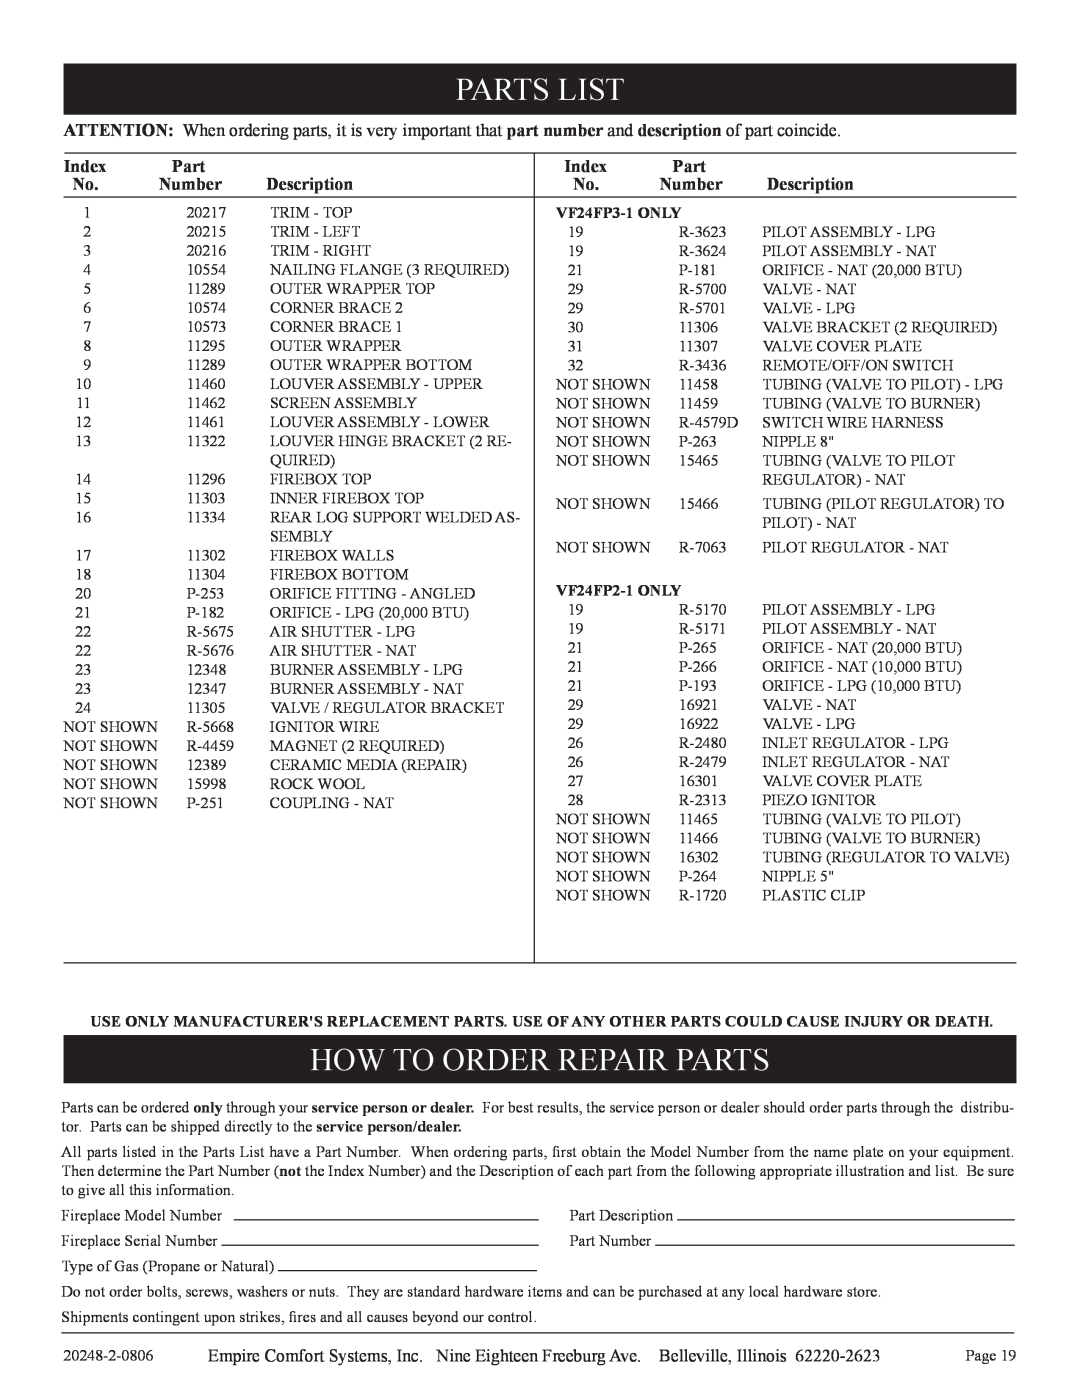 Empire Comfort Systems VF24FP3-1, VF24FP2-1 Parts List, How To Order Repair Parts, Index, Description, Number 